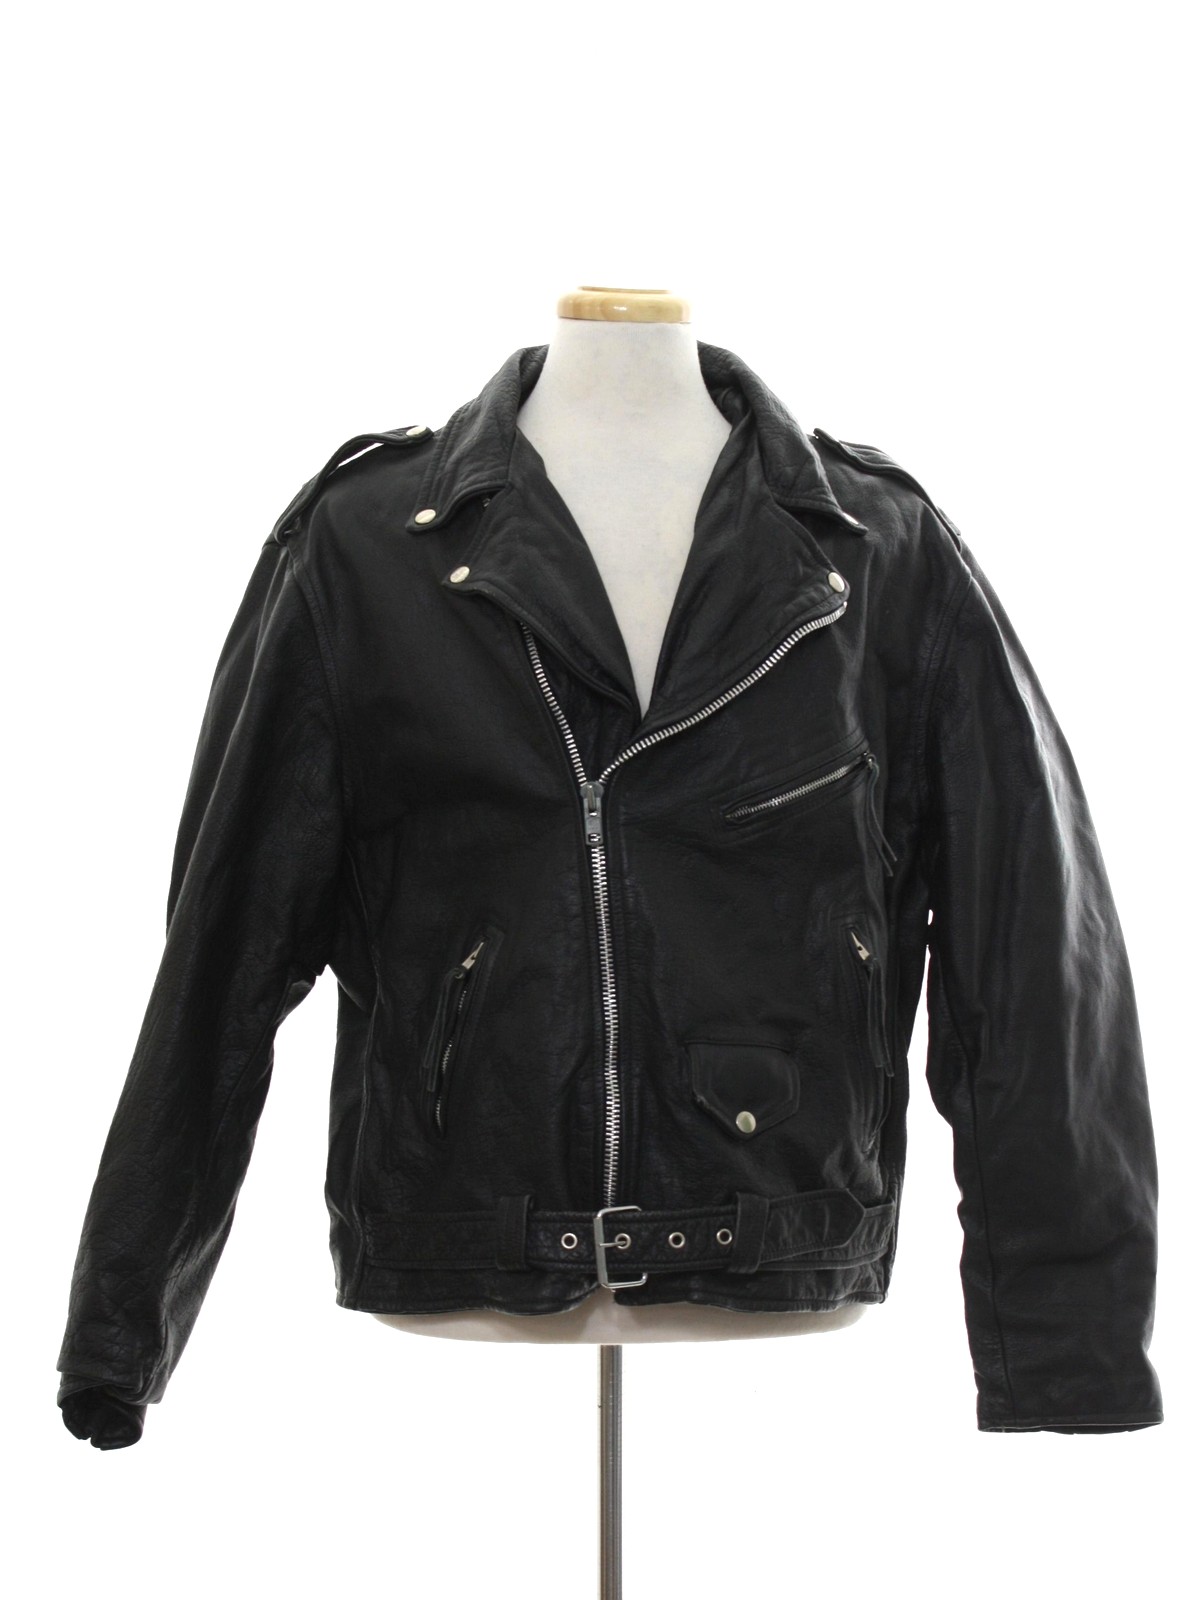 Highway One 1980s Vintage Leather Jacket: Late 80s or Early 90s ...